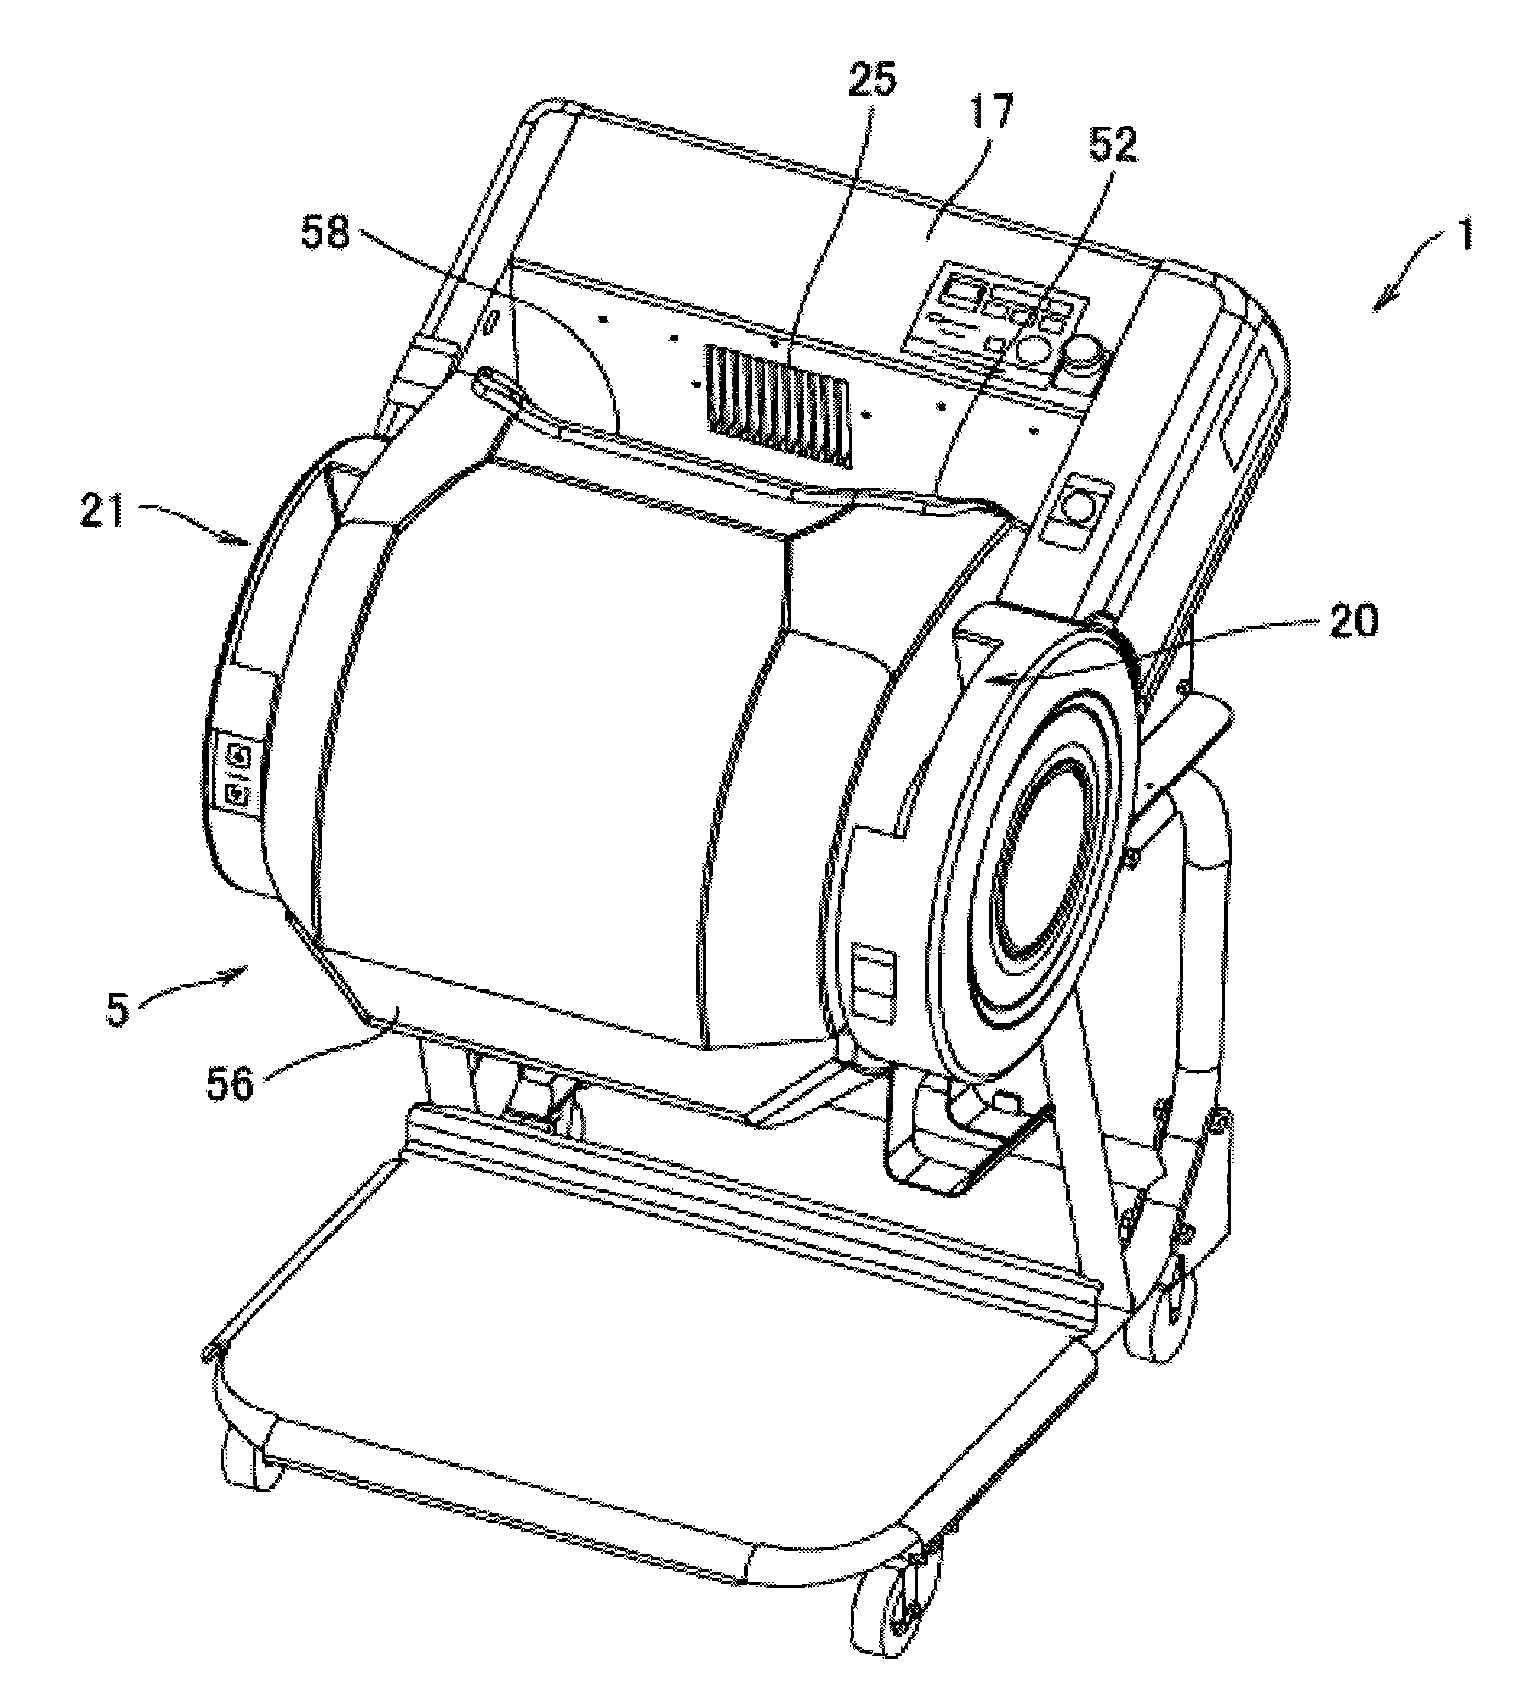 Drum for cooked-rice stirring apparatus and cooked-rice stirring apparatus